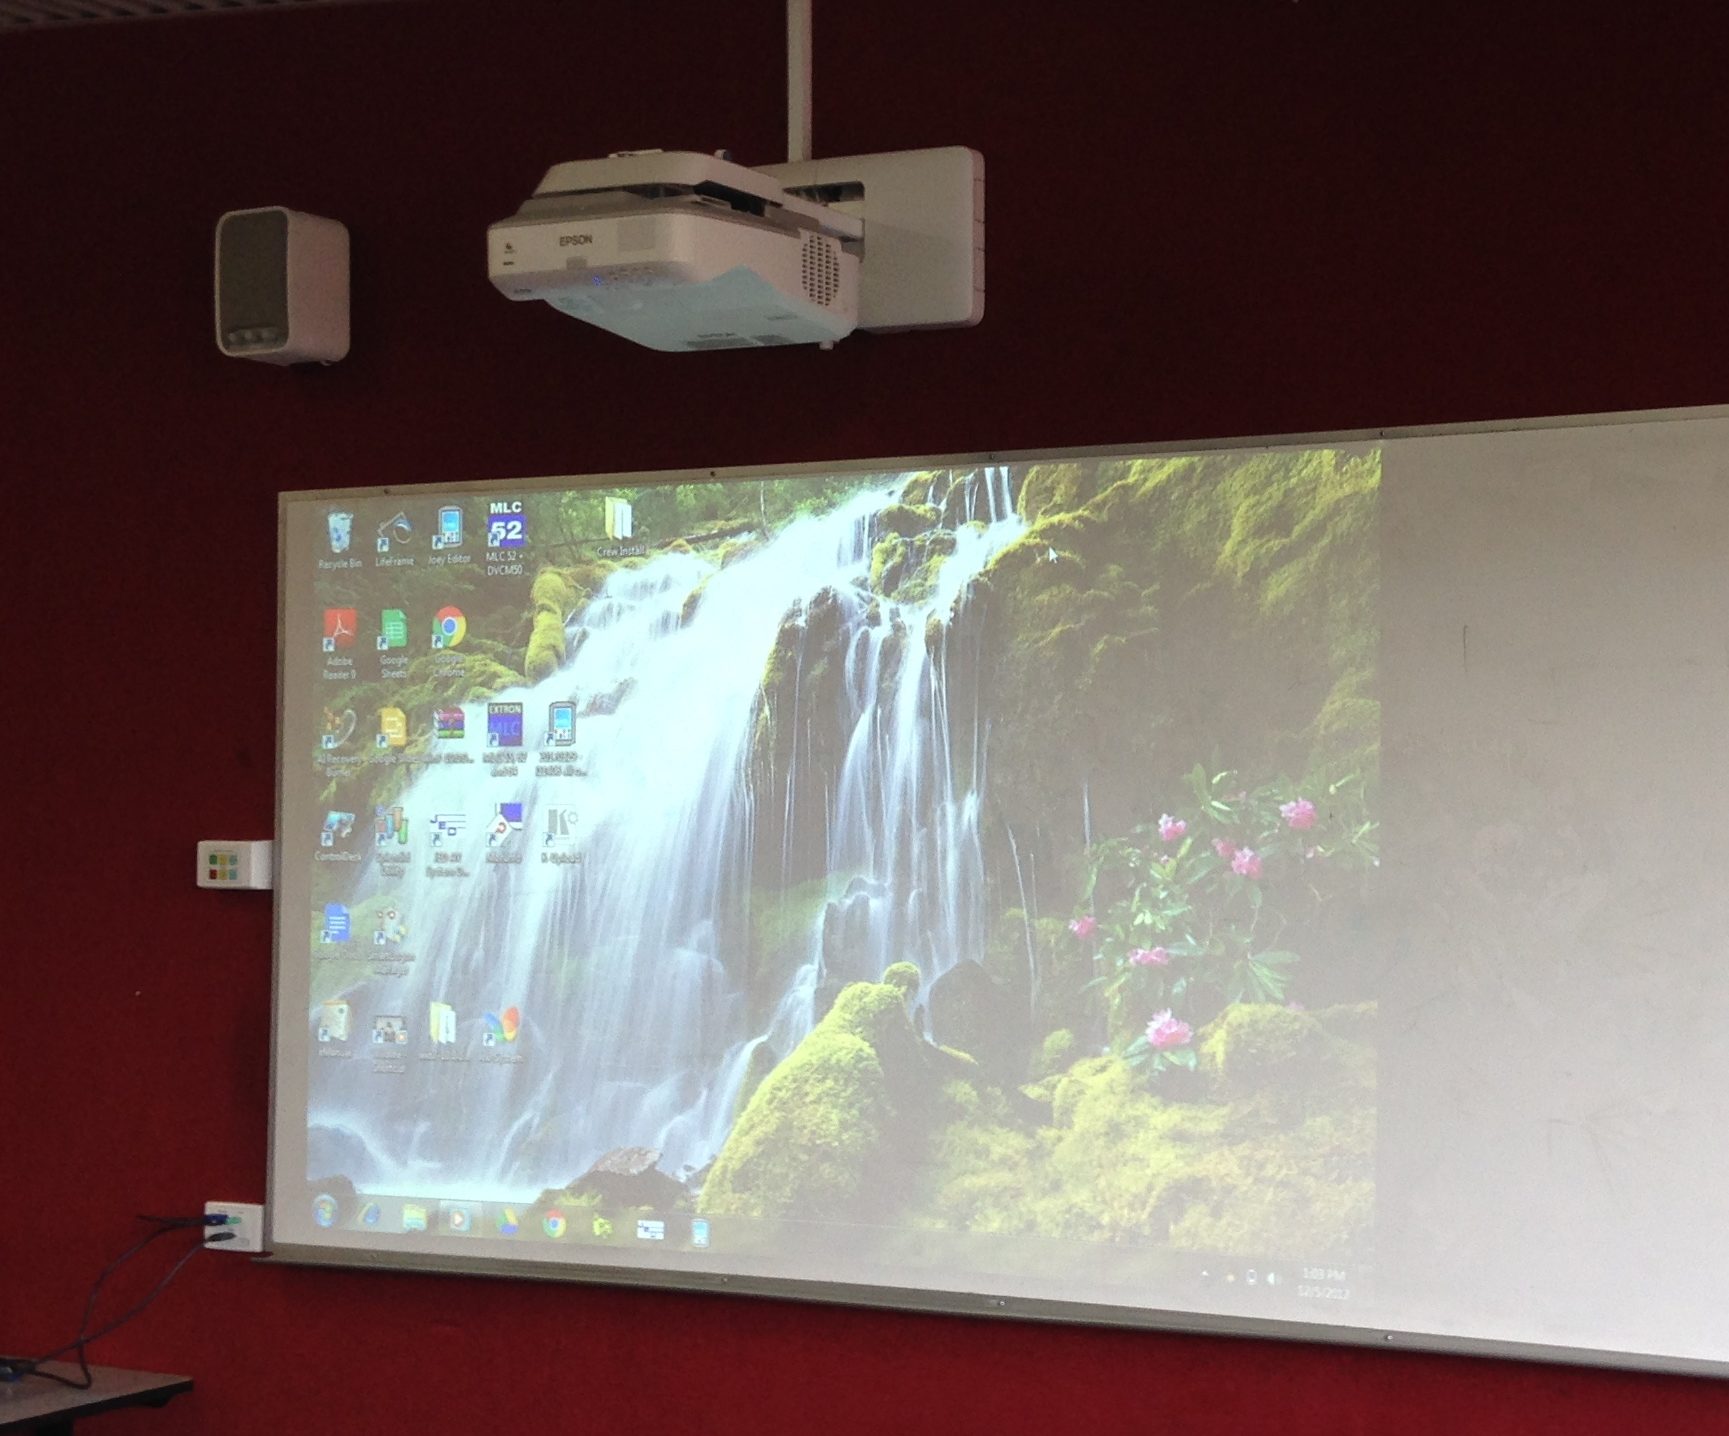  EPSON EB-685W Ultra Short Throw Projector at Hume Anglican Grammar